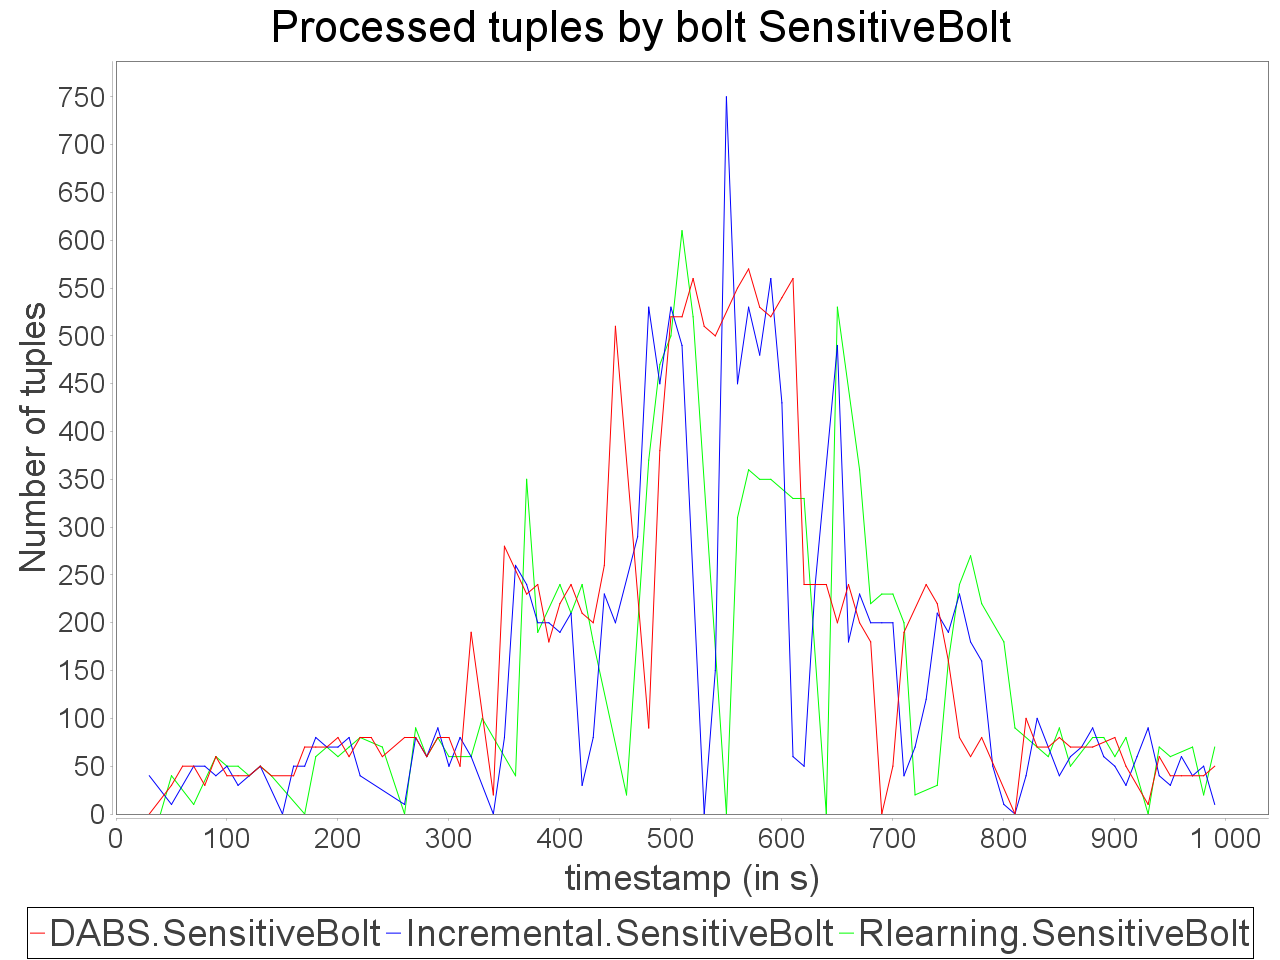 Processed tuples by sensitive bolt